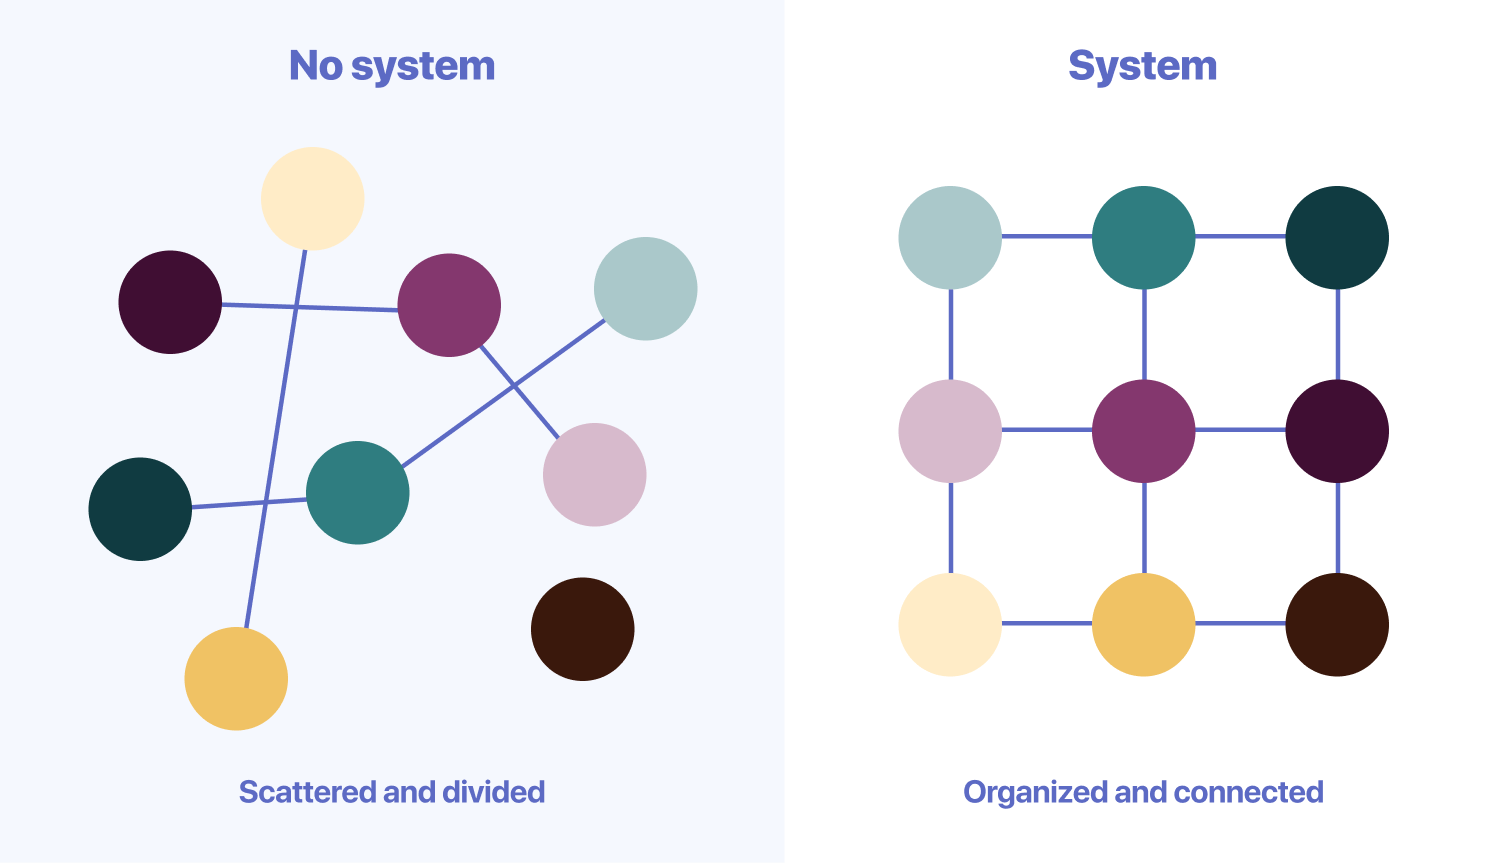 A system organizes and connect all colors.